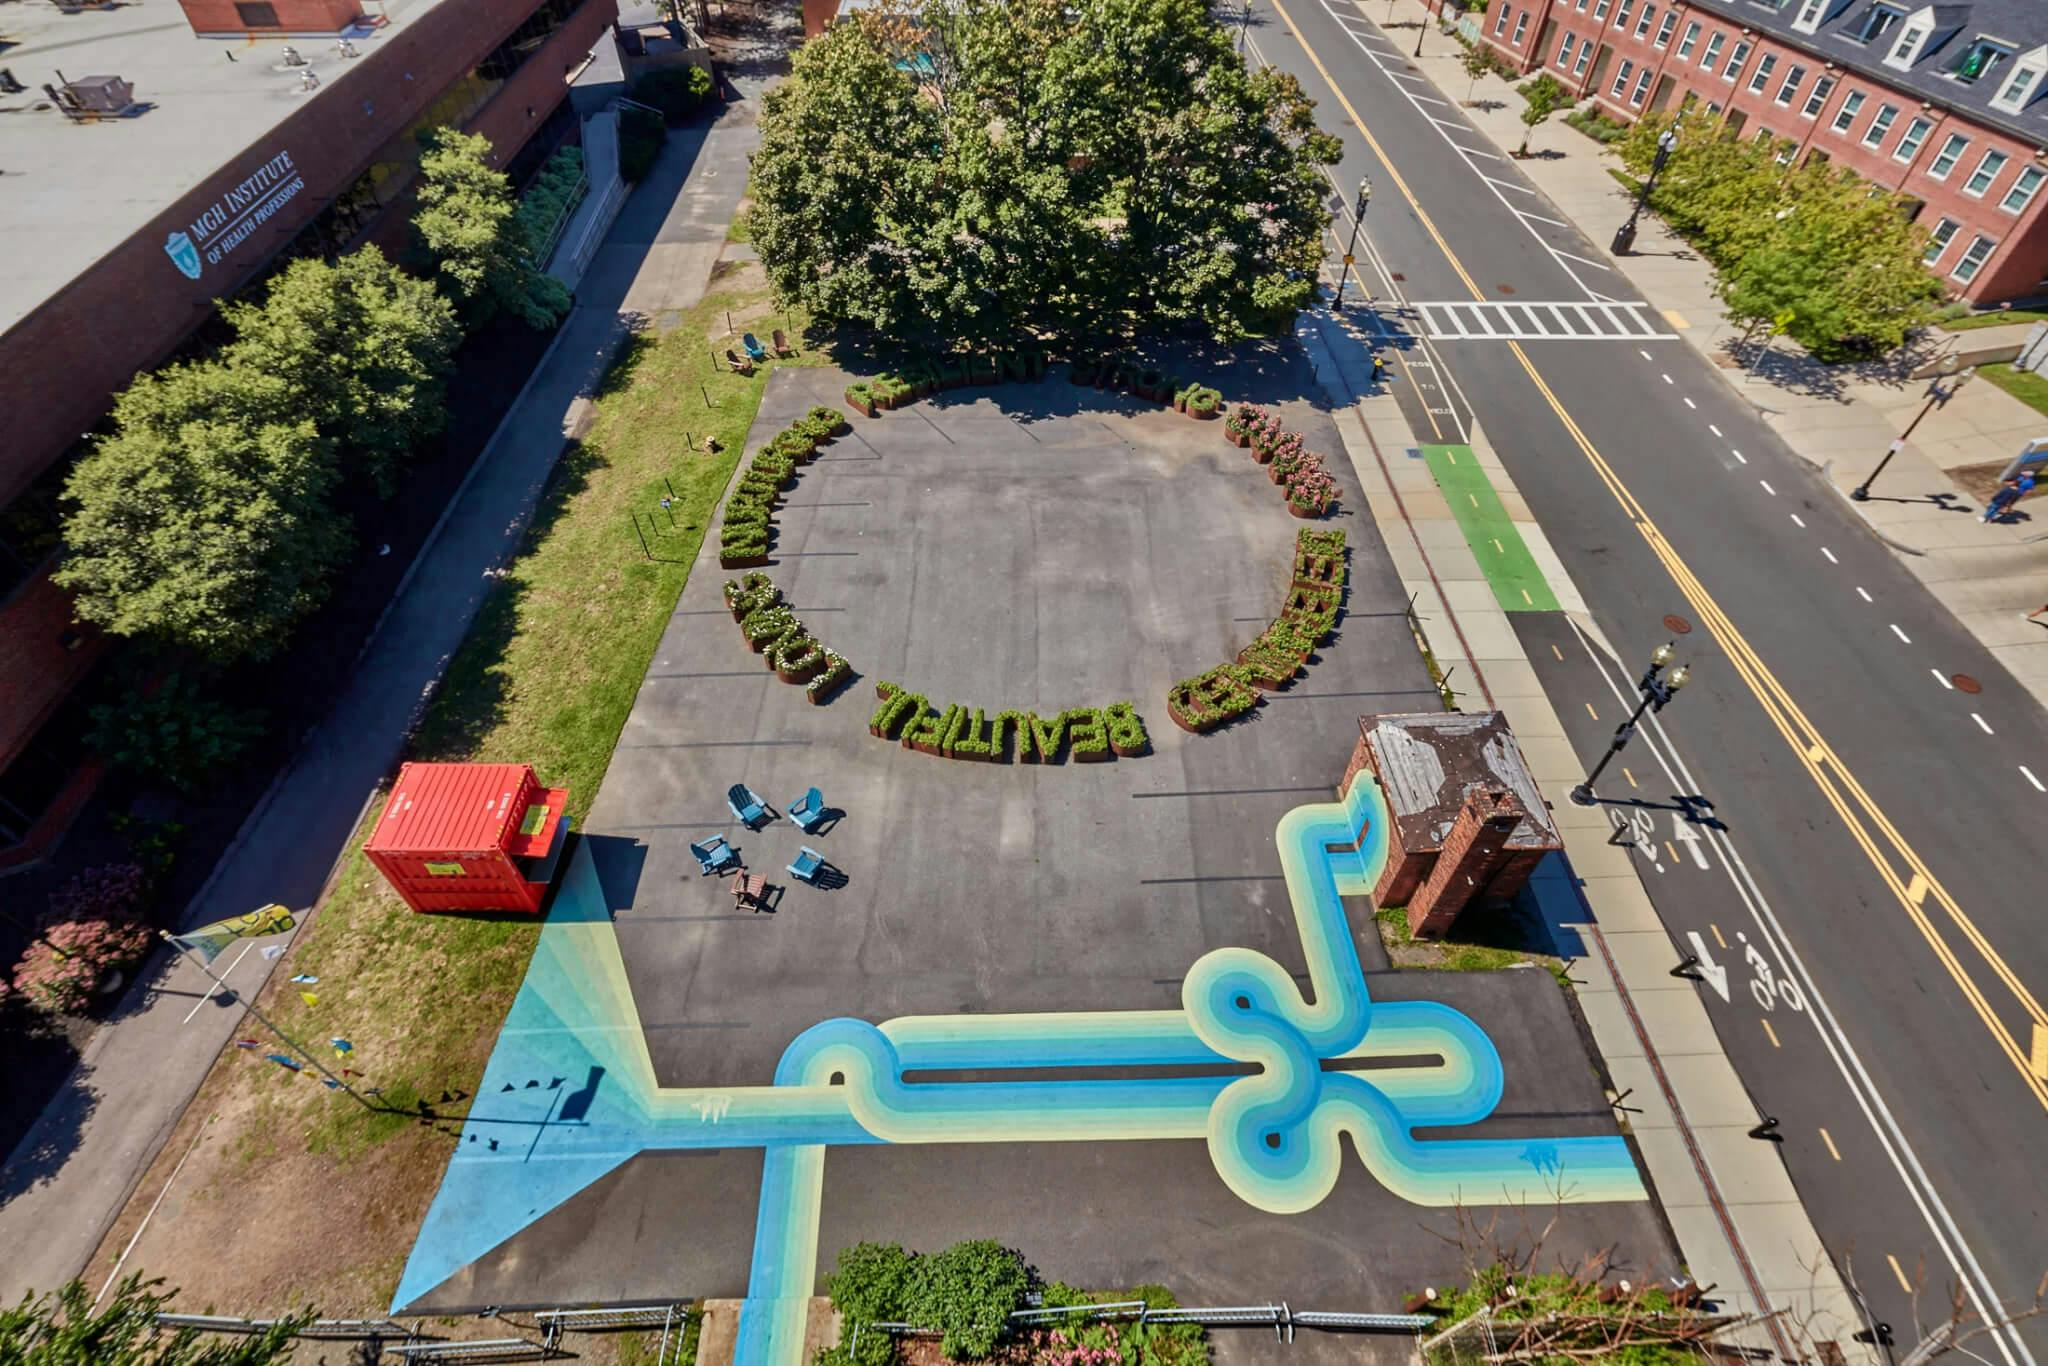 An aerial view of two vibrant public art works, featuring green letters made from plant life, in the shape of a circle.